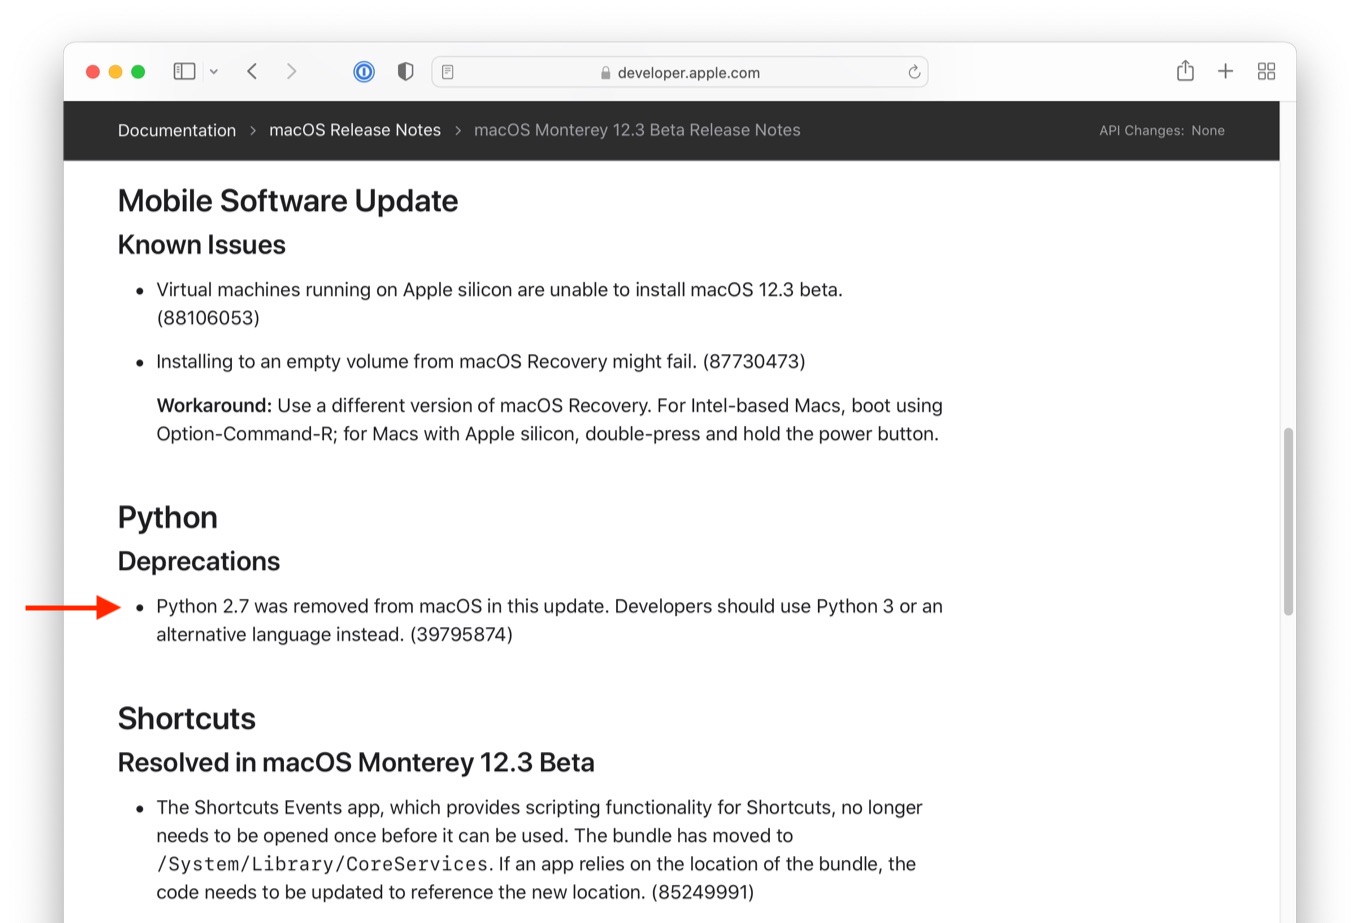 Python 2.7 was removed from macOS 12.3 Monterey